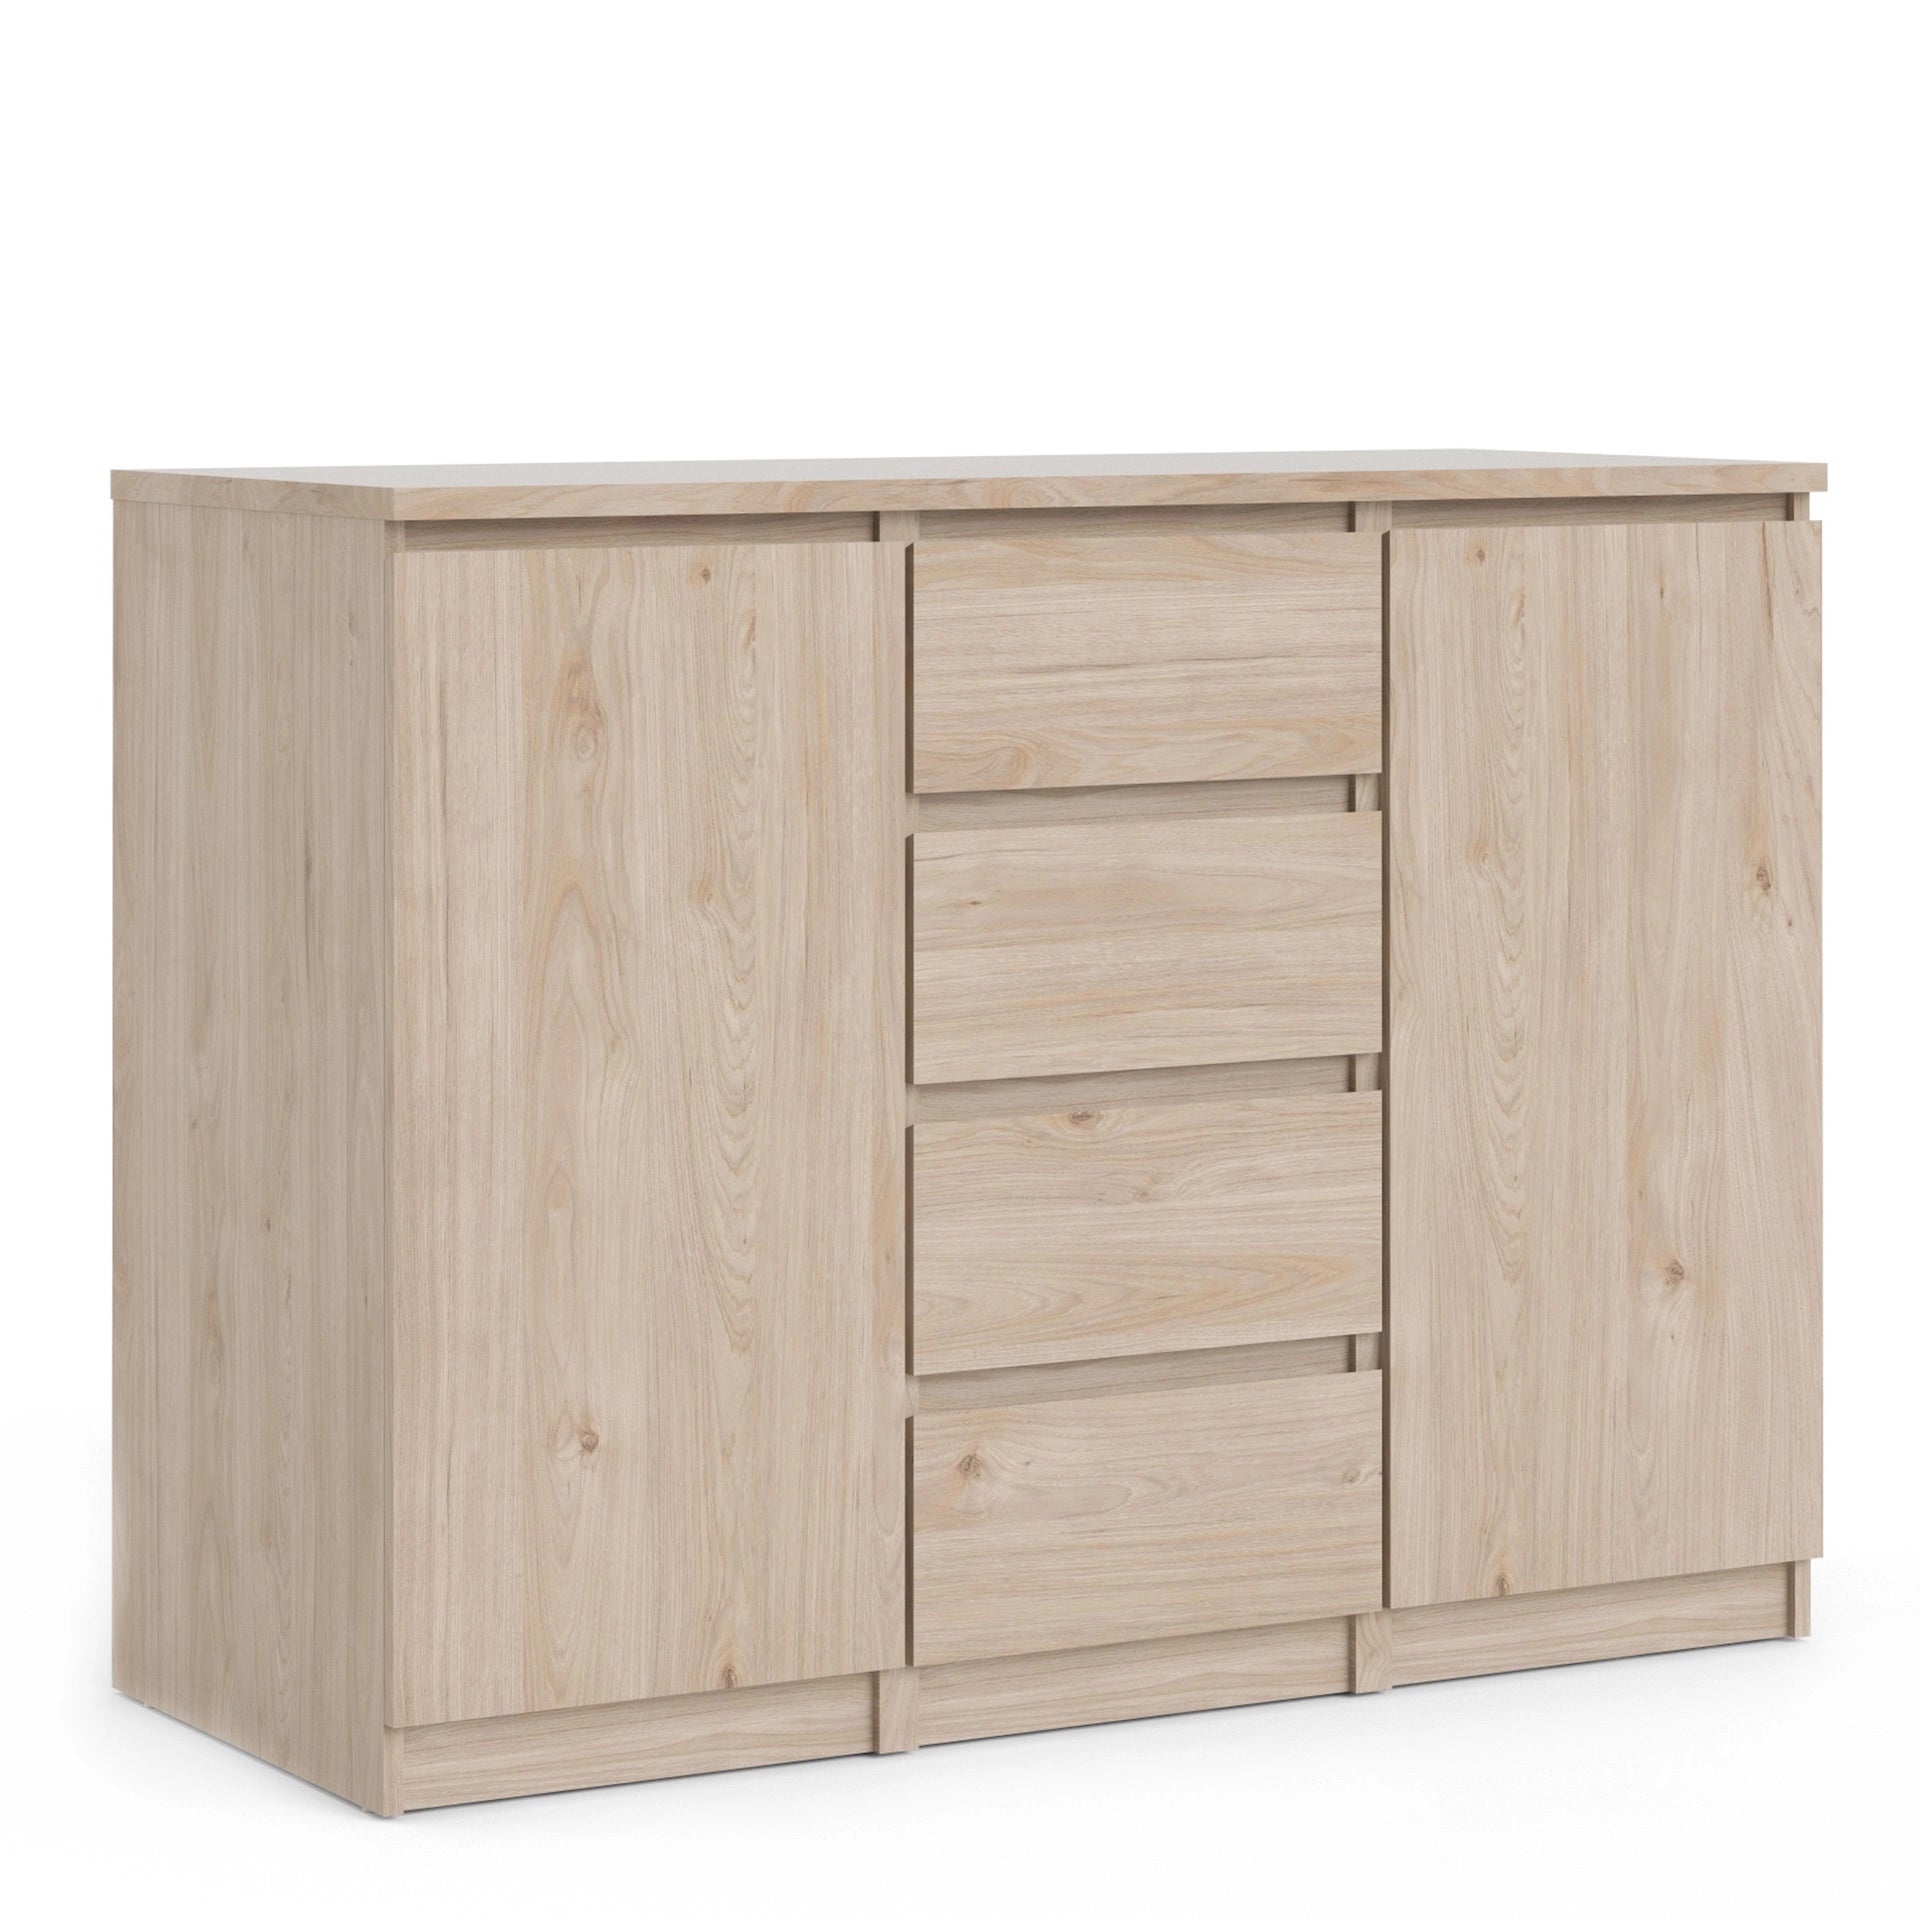 Furniture To Go Naia Sideboard 4 Drawers 2 Doors in Jackson Hickory Oak